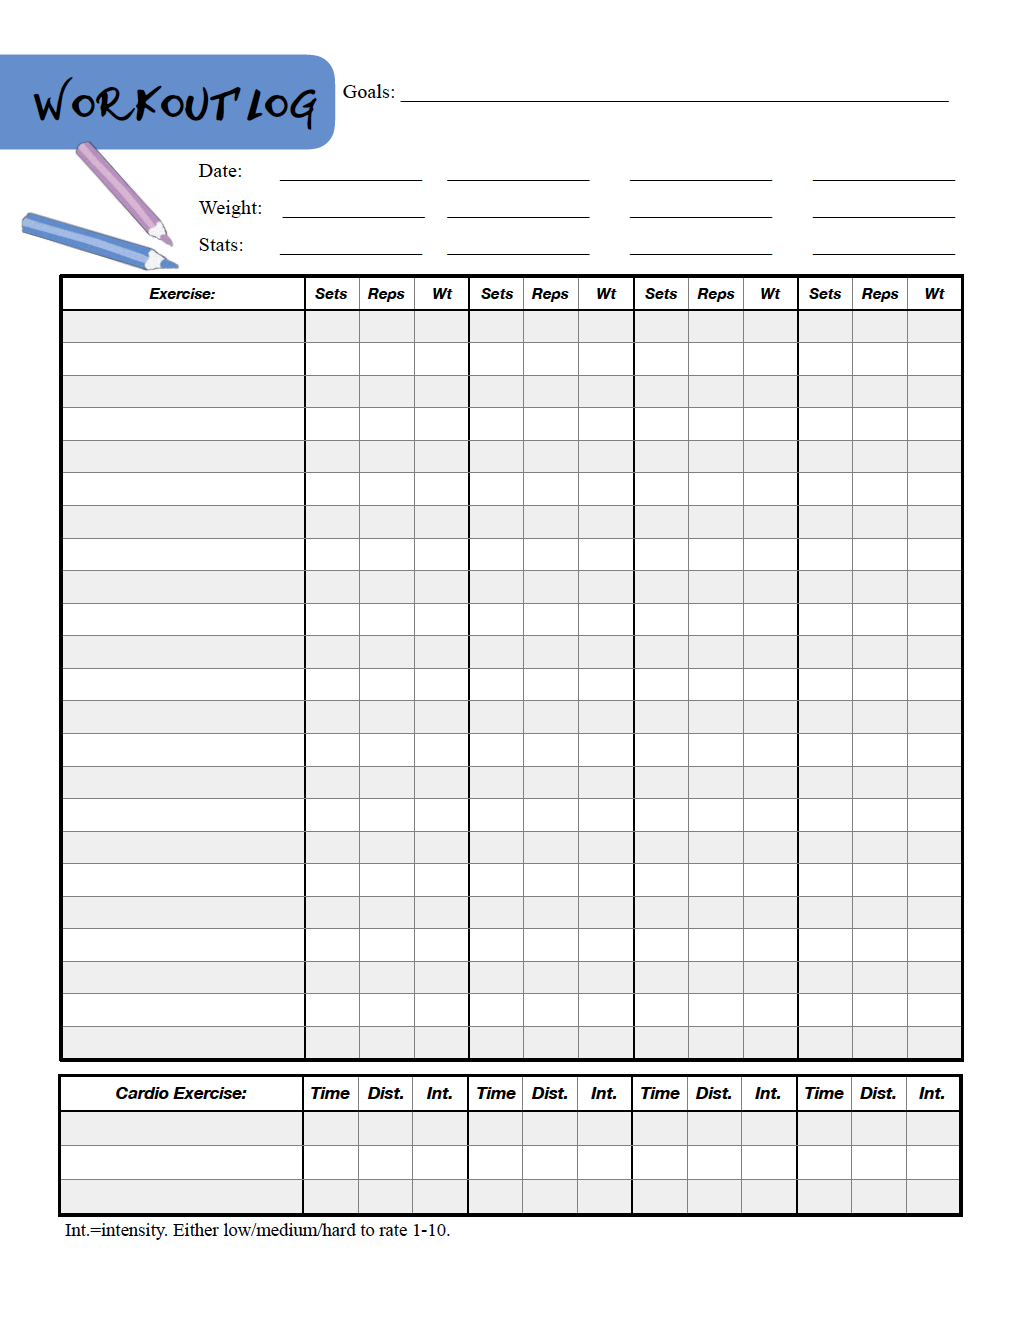 Free Printable Workout Logs: 3 Designs For Your Needs - Free Printable Workout Log